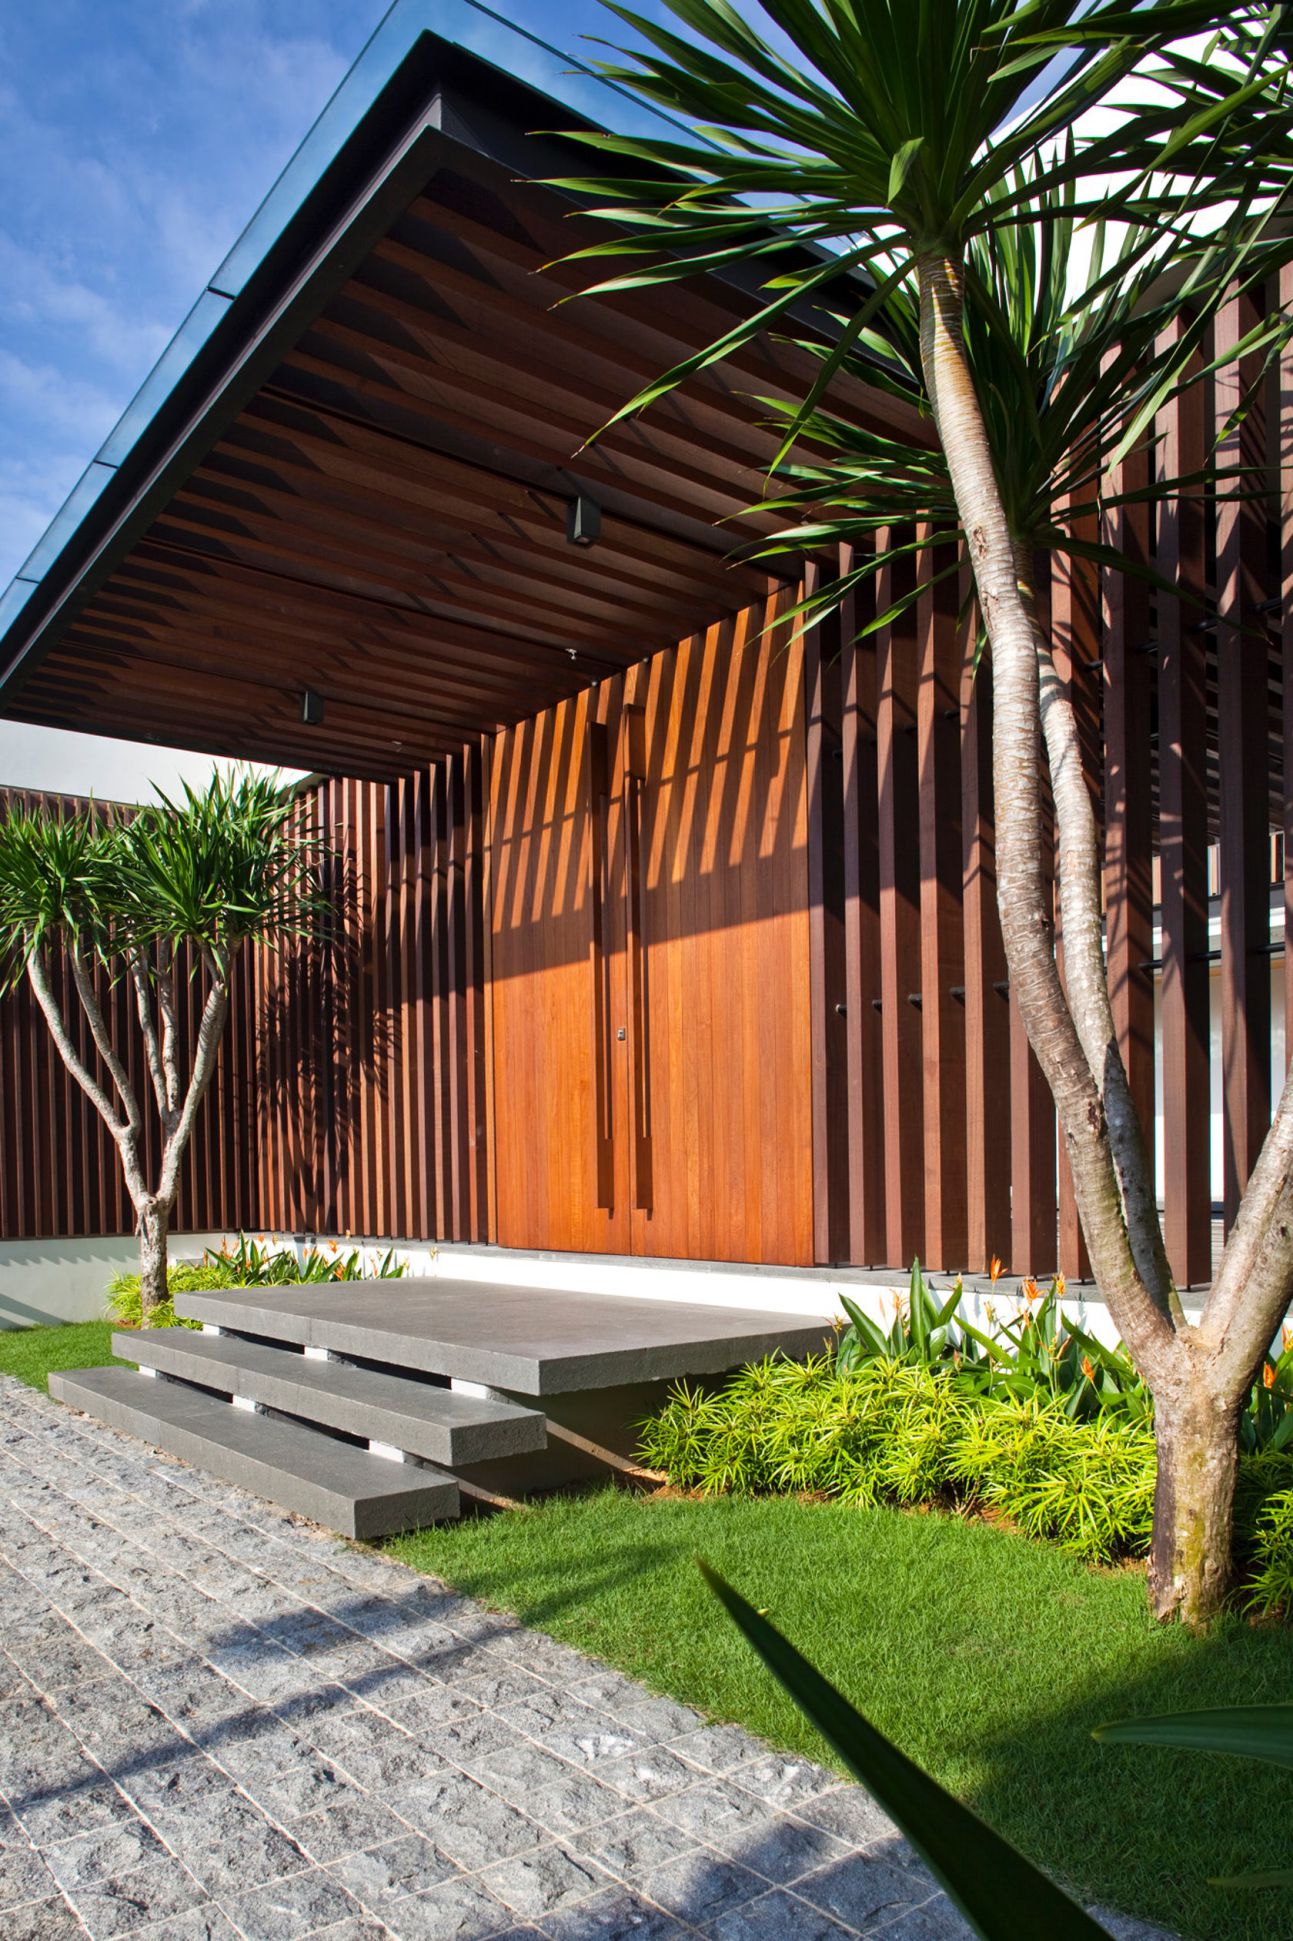 Enclosed-Open-House-in-Singapore-by-Wallflower-Architecture-Design-4